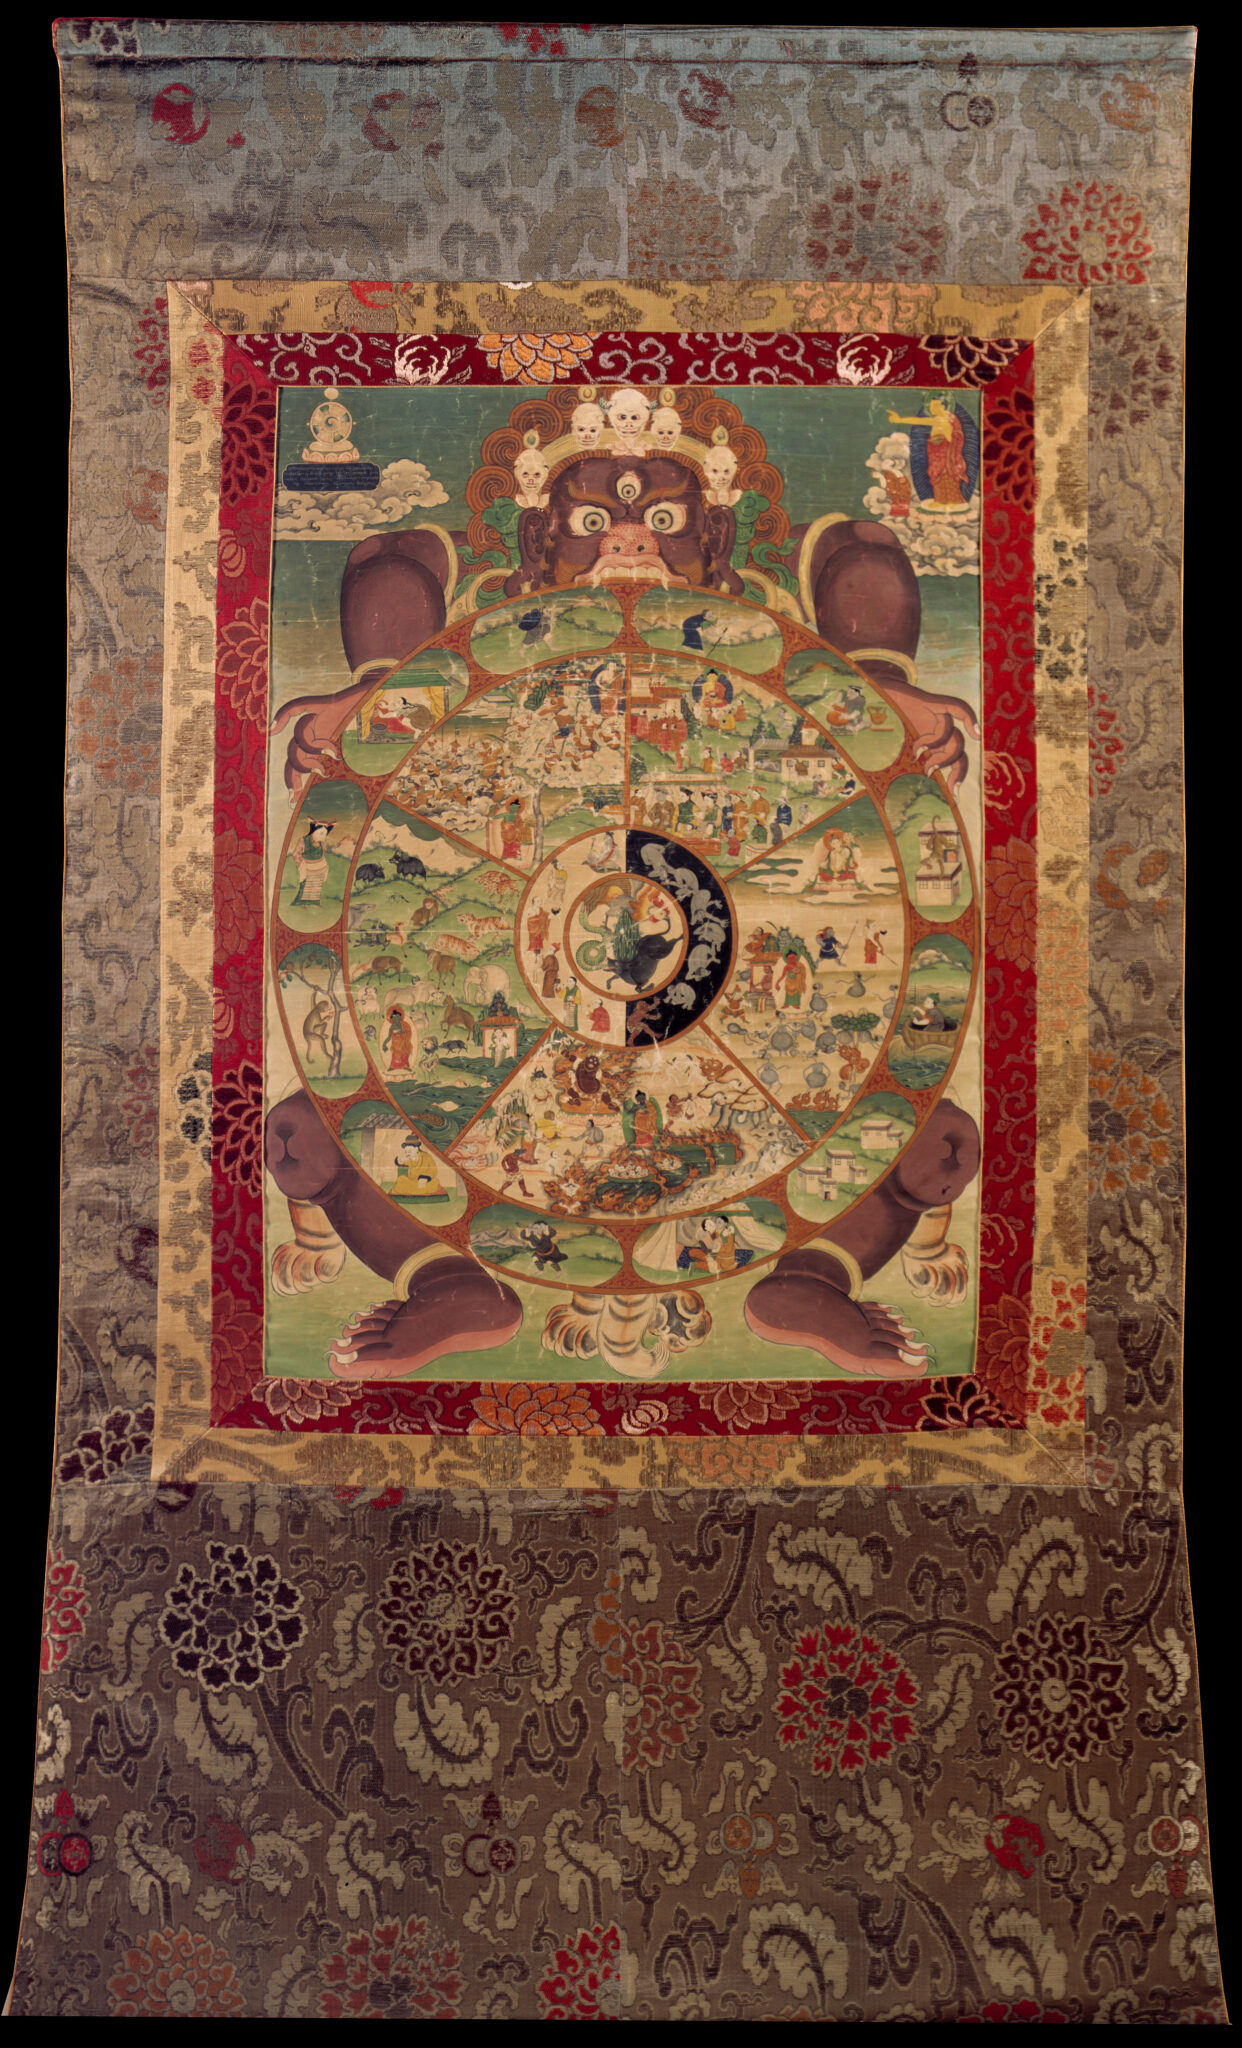 Painting mounted on brocade depicting wheel divided into multiple scenes held by wrathful deity